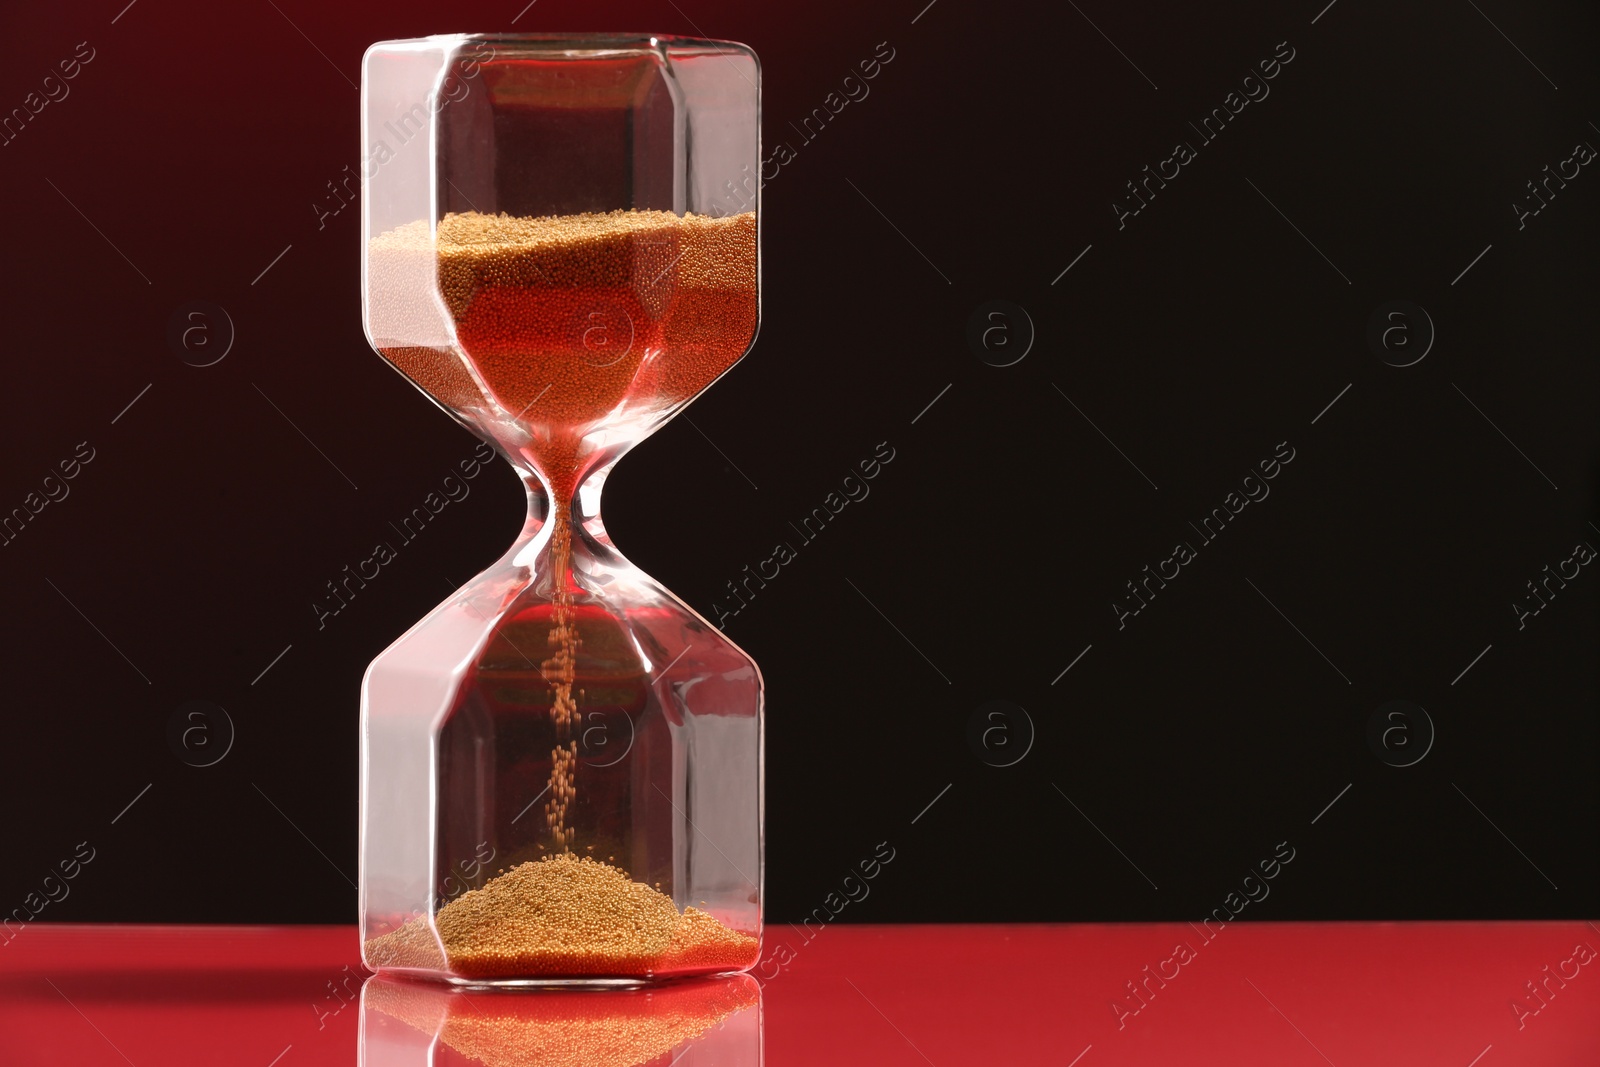 Photo of Hourglass with flowing sand on table against dark background. Space for text